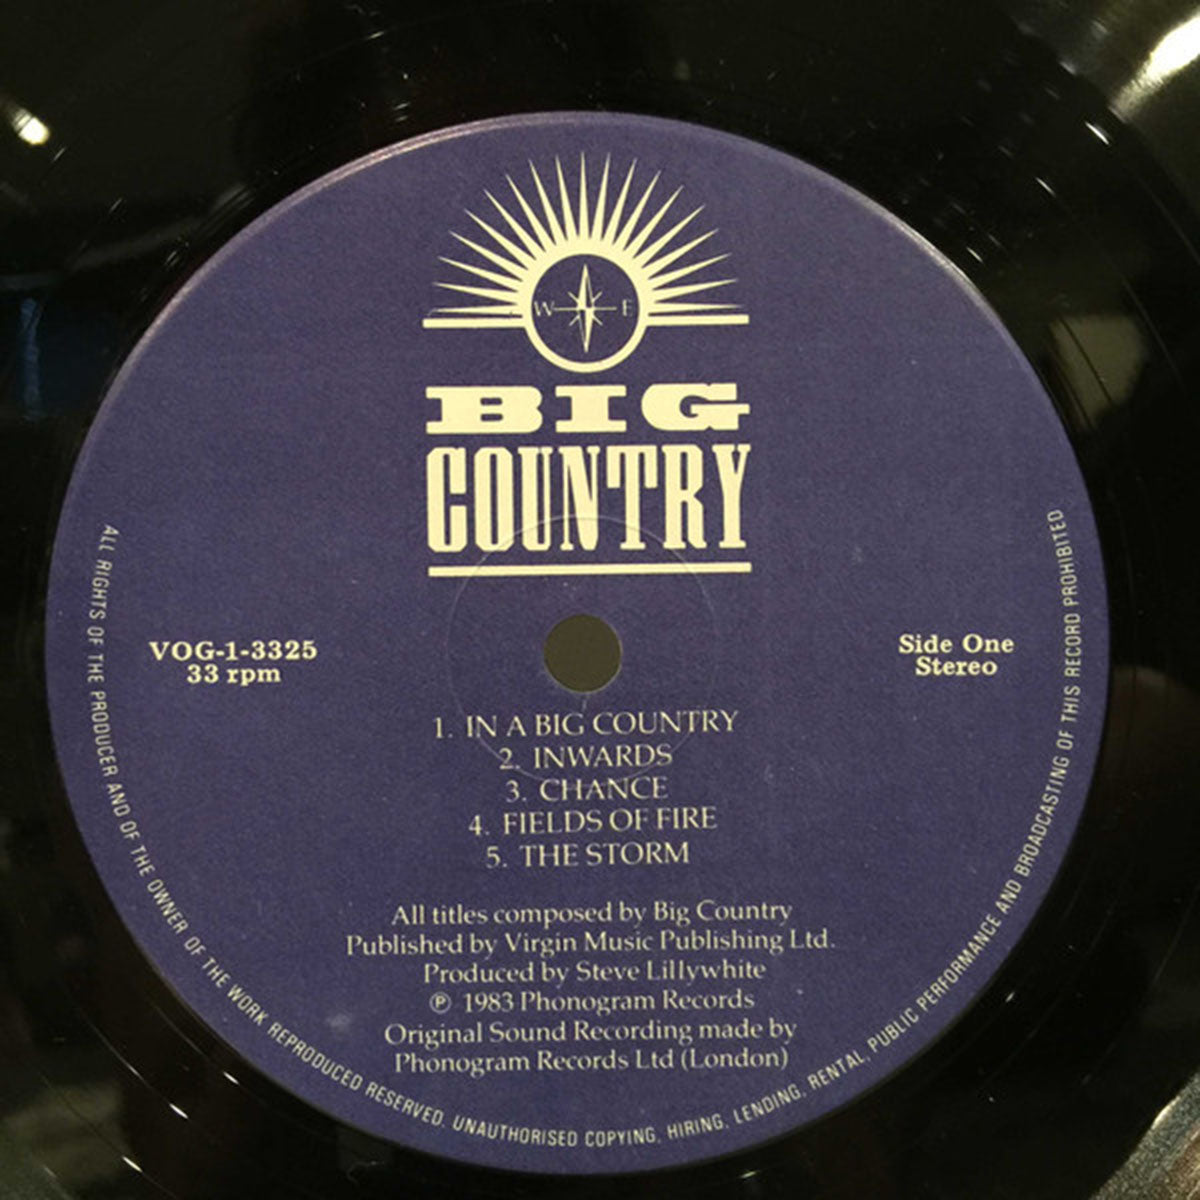 Big Country – The Crossing - 1983